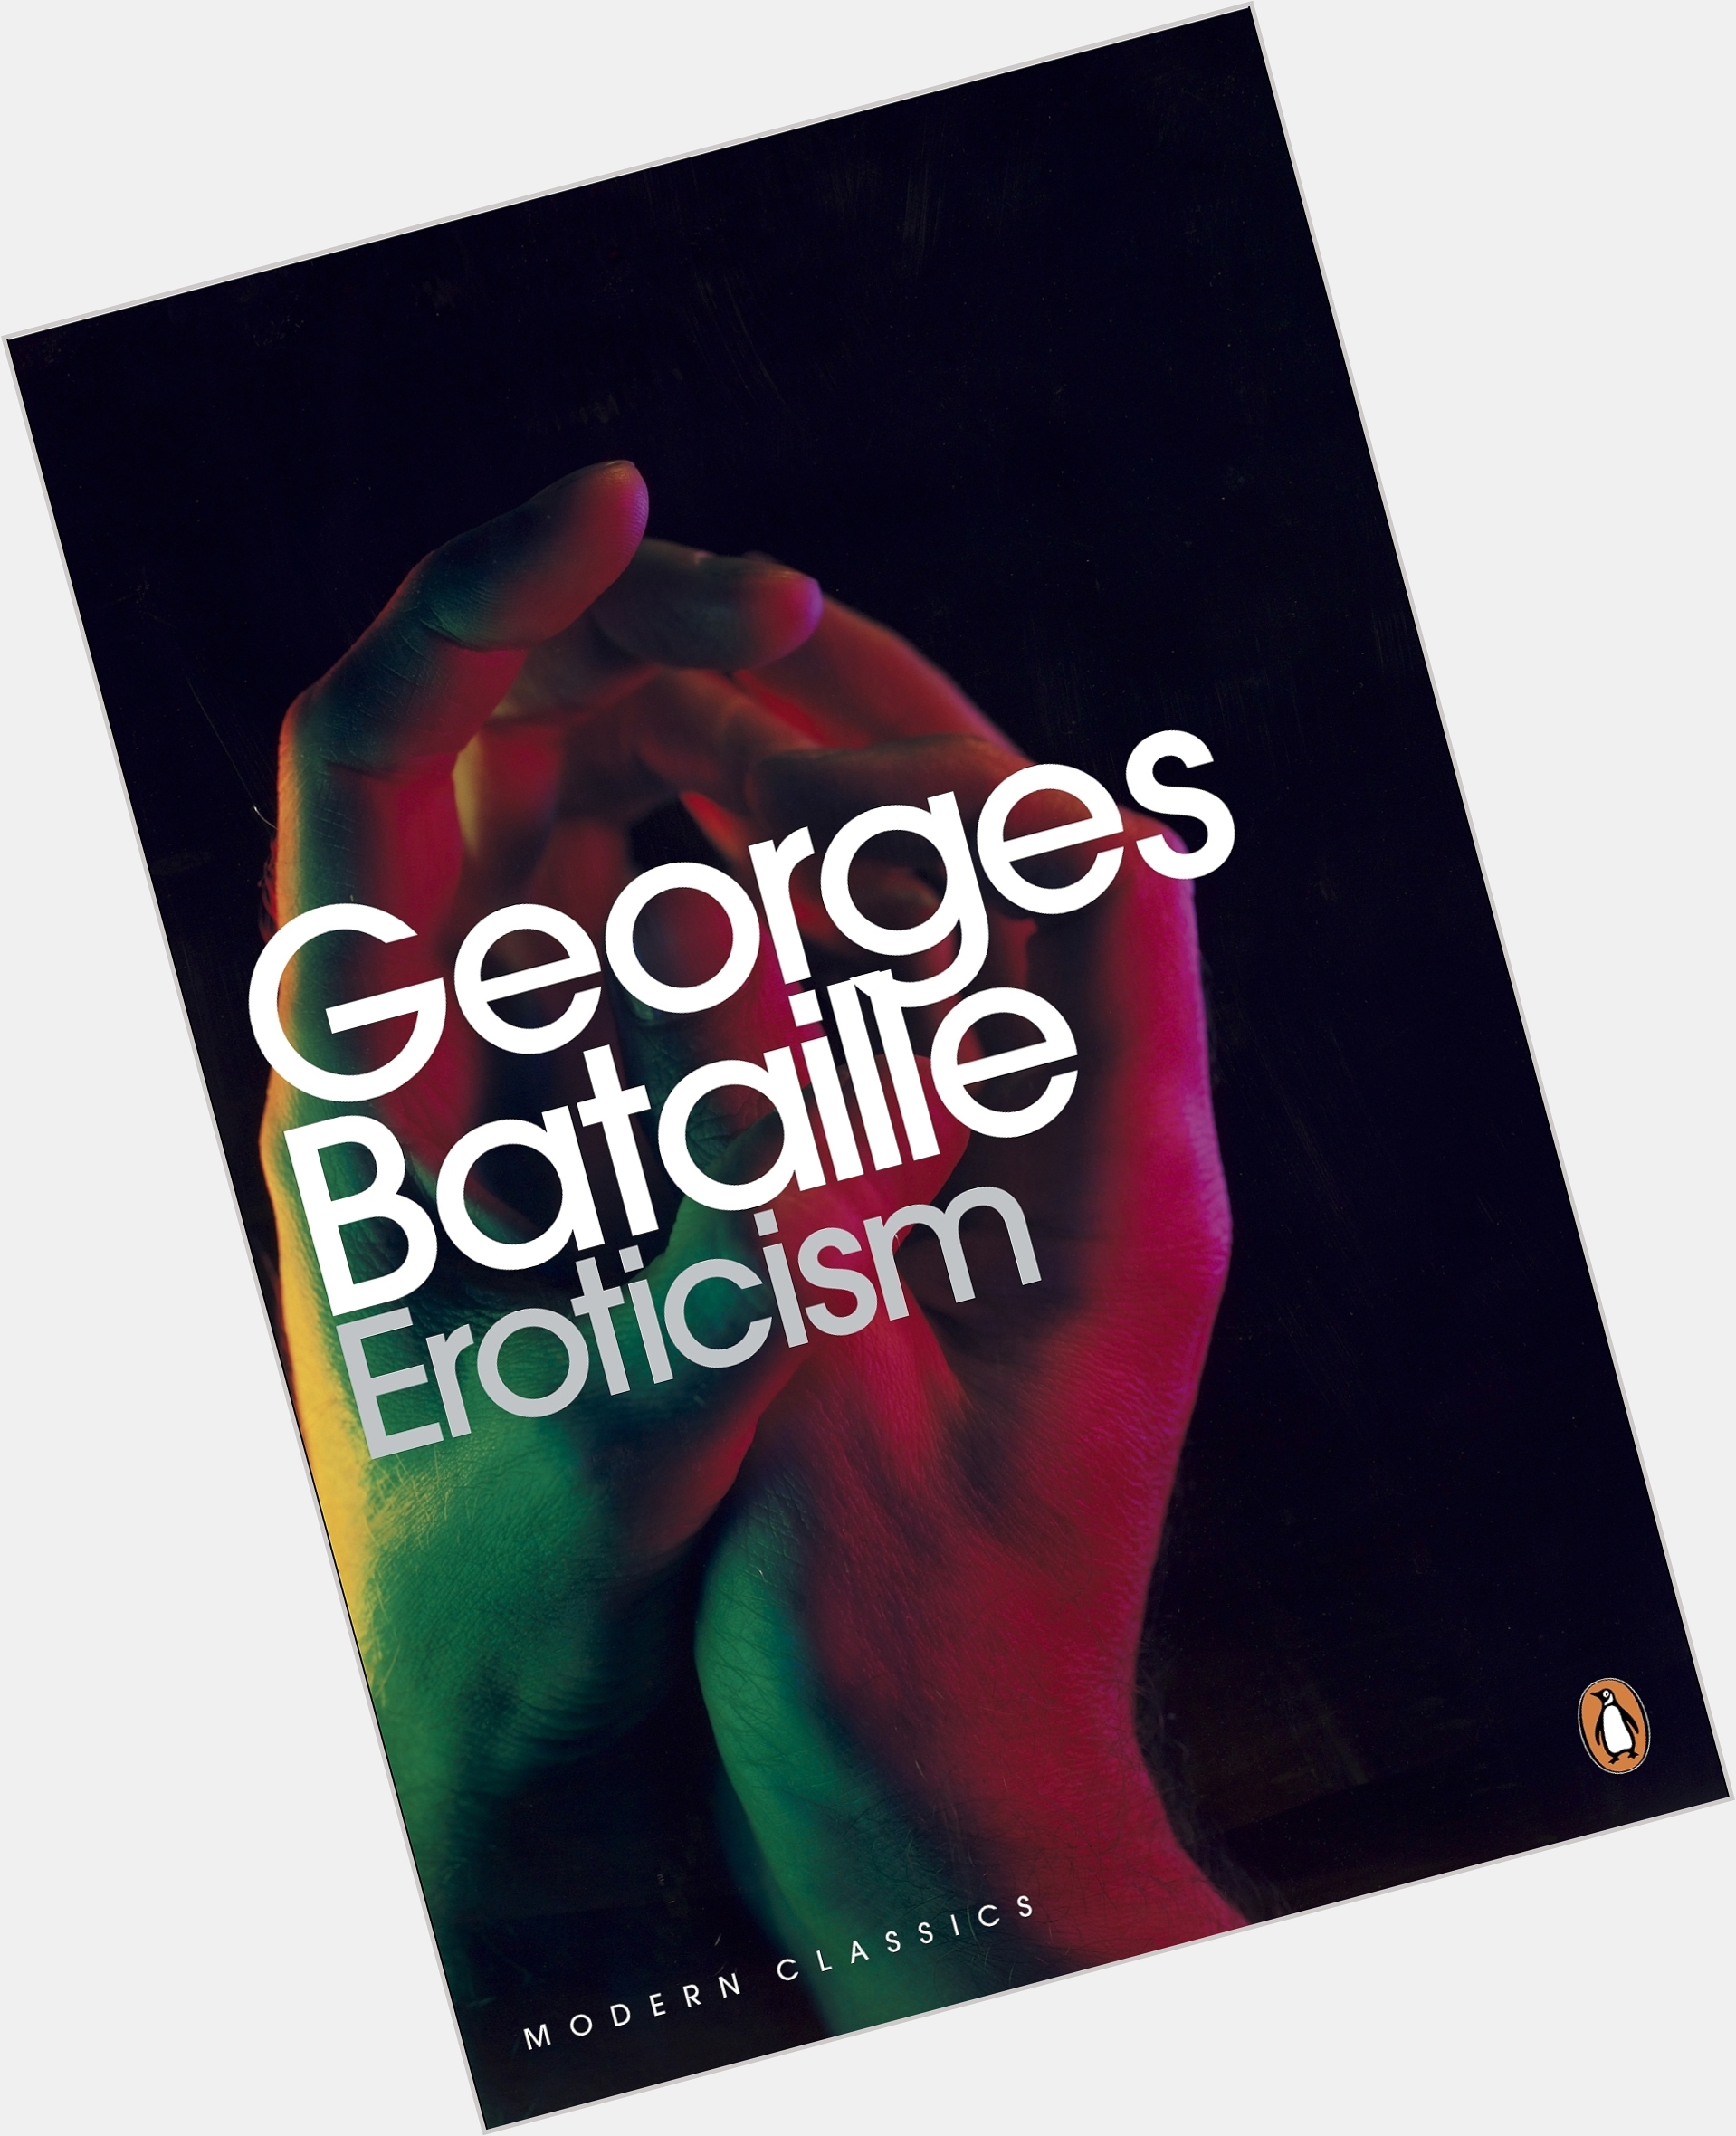 <a href="/hot-men/georges-bataille/where-dating-news-photos">Georges Bataille</a>  